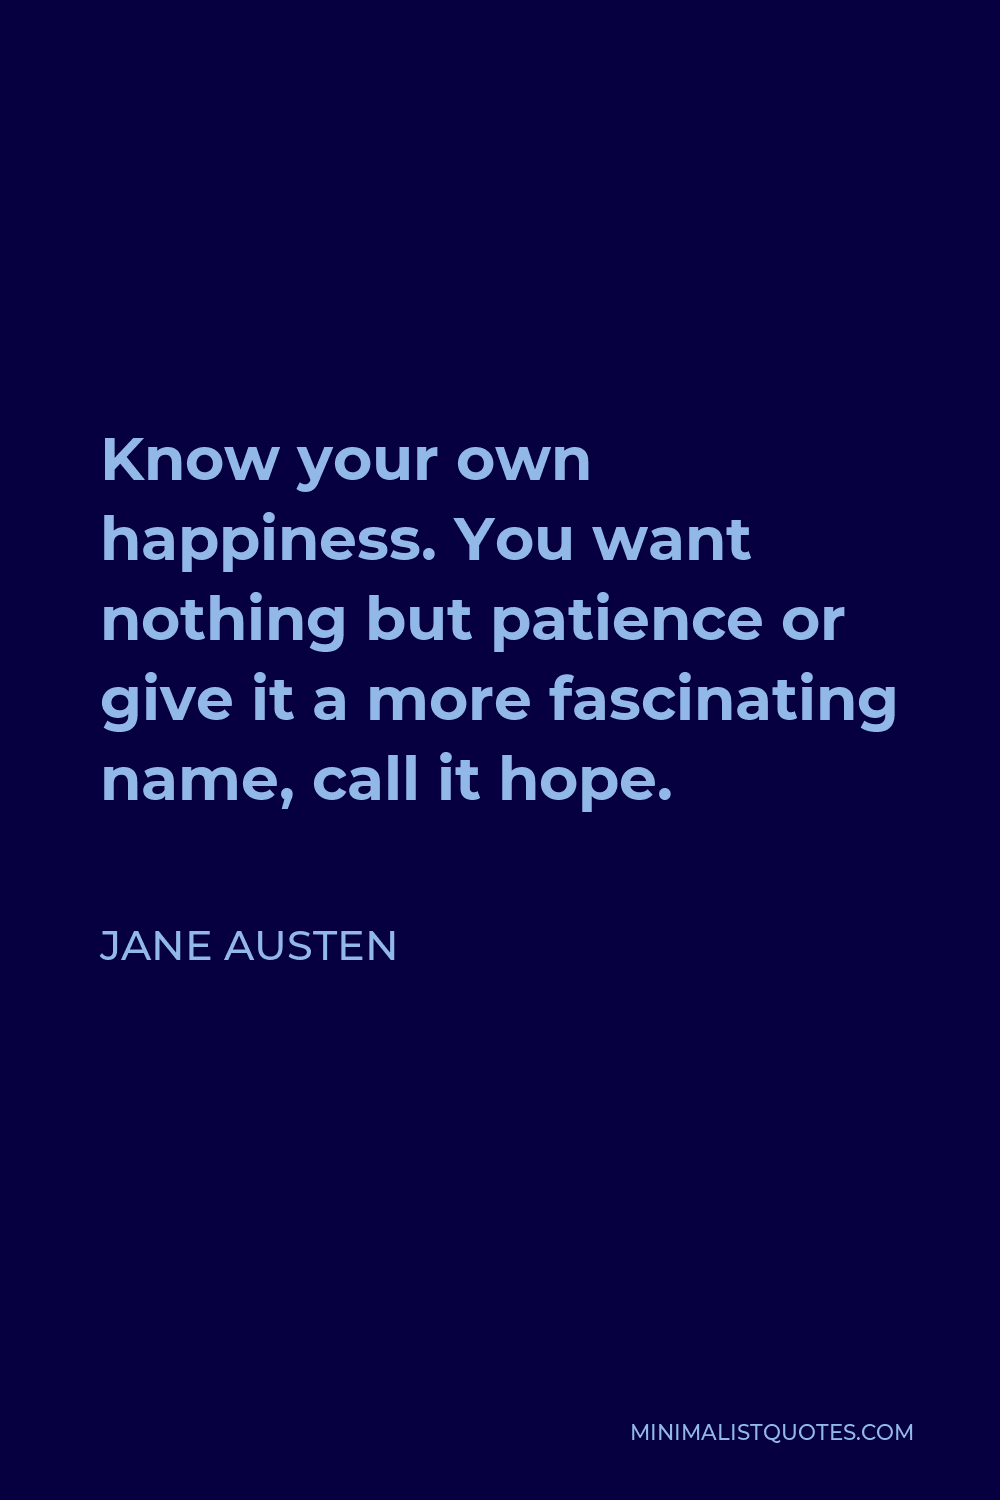 Jane Austen Quote - Know your own happiness. You want nothing but patience or give it a more fascinating name, call it hope.